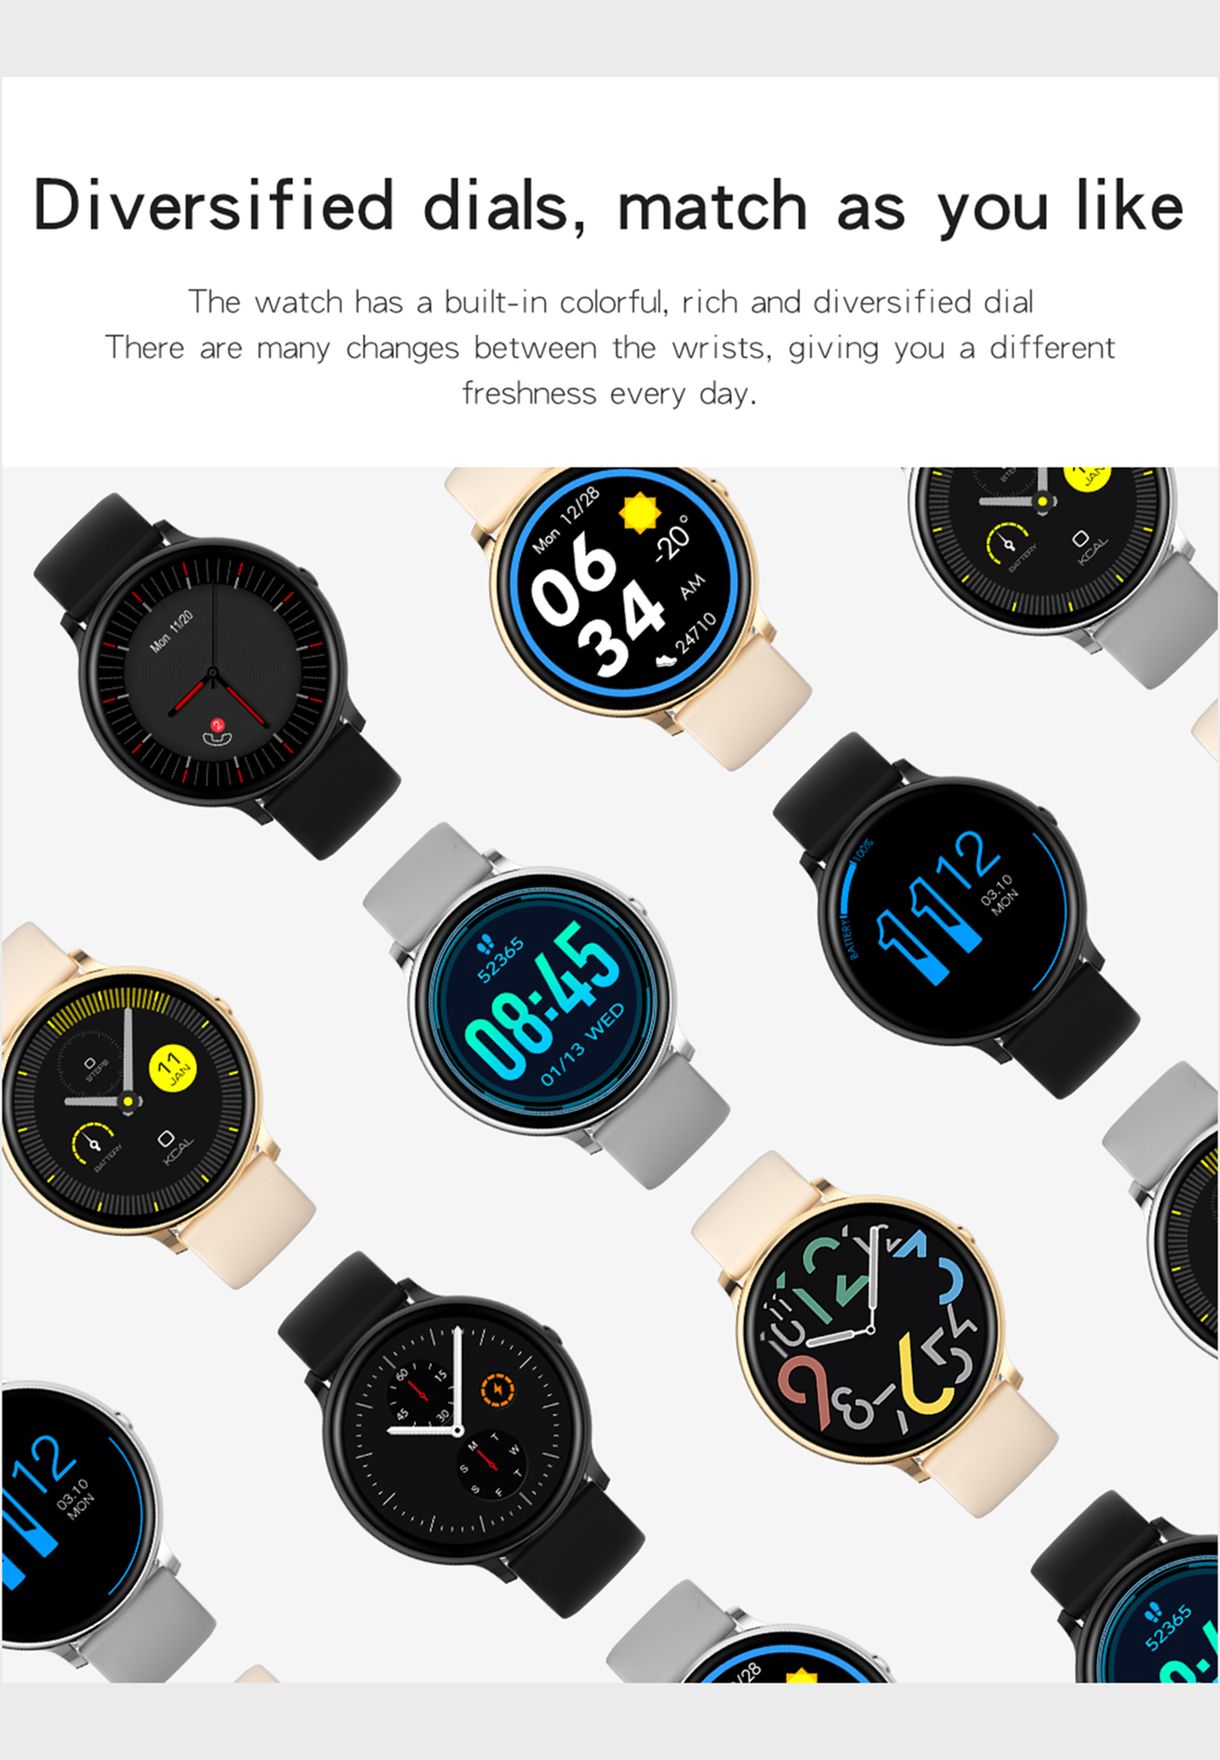 Smart Watch With Fitness And Calling Features